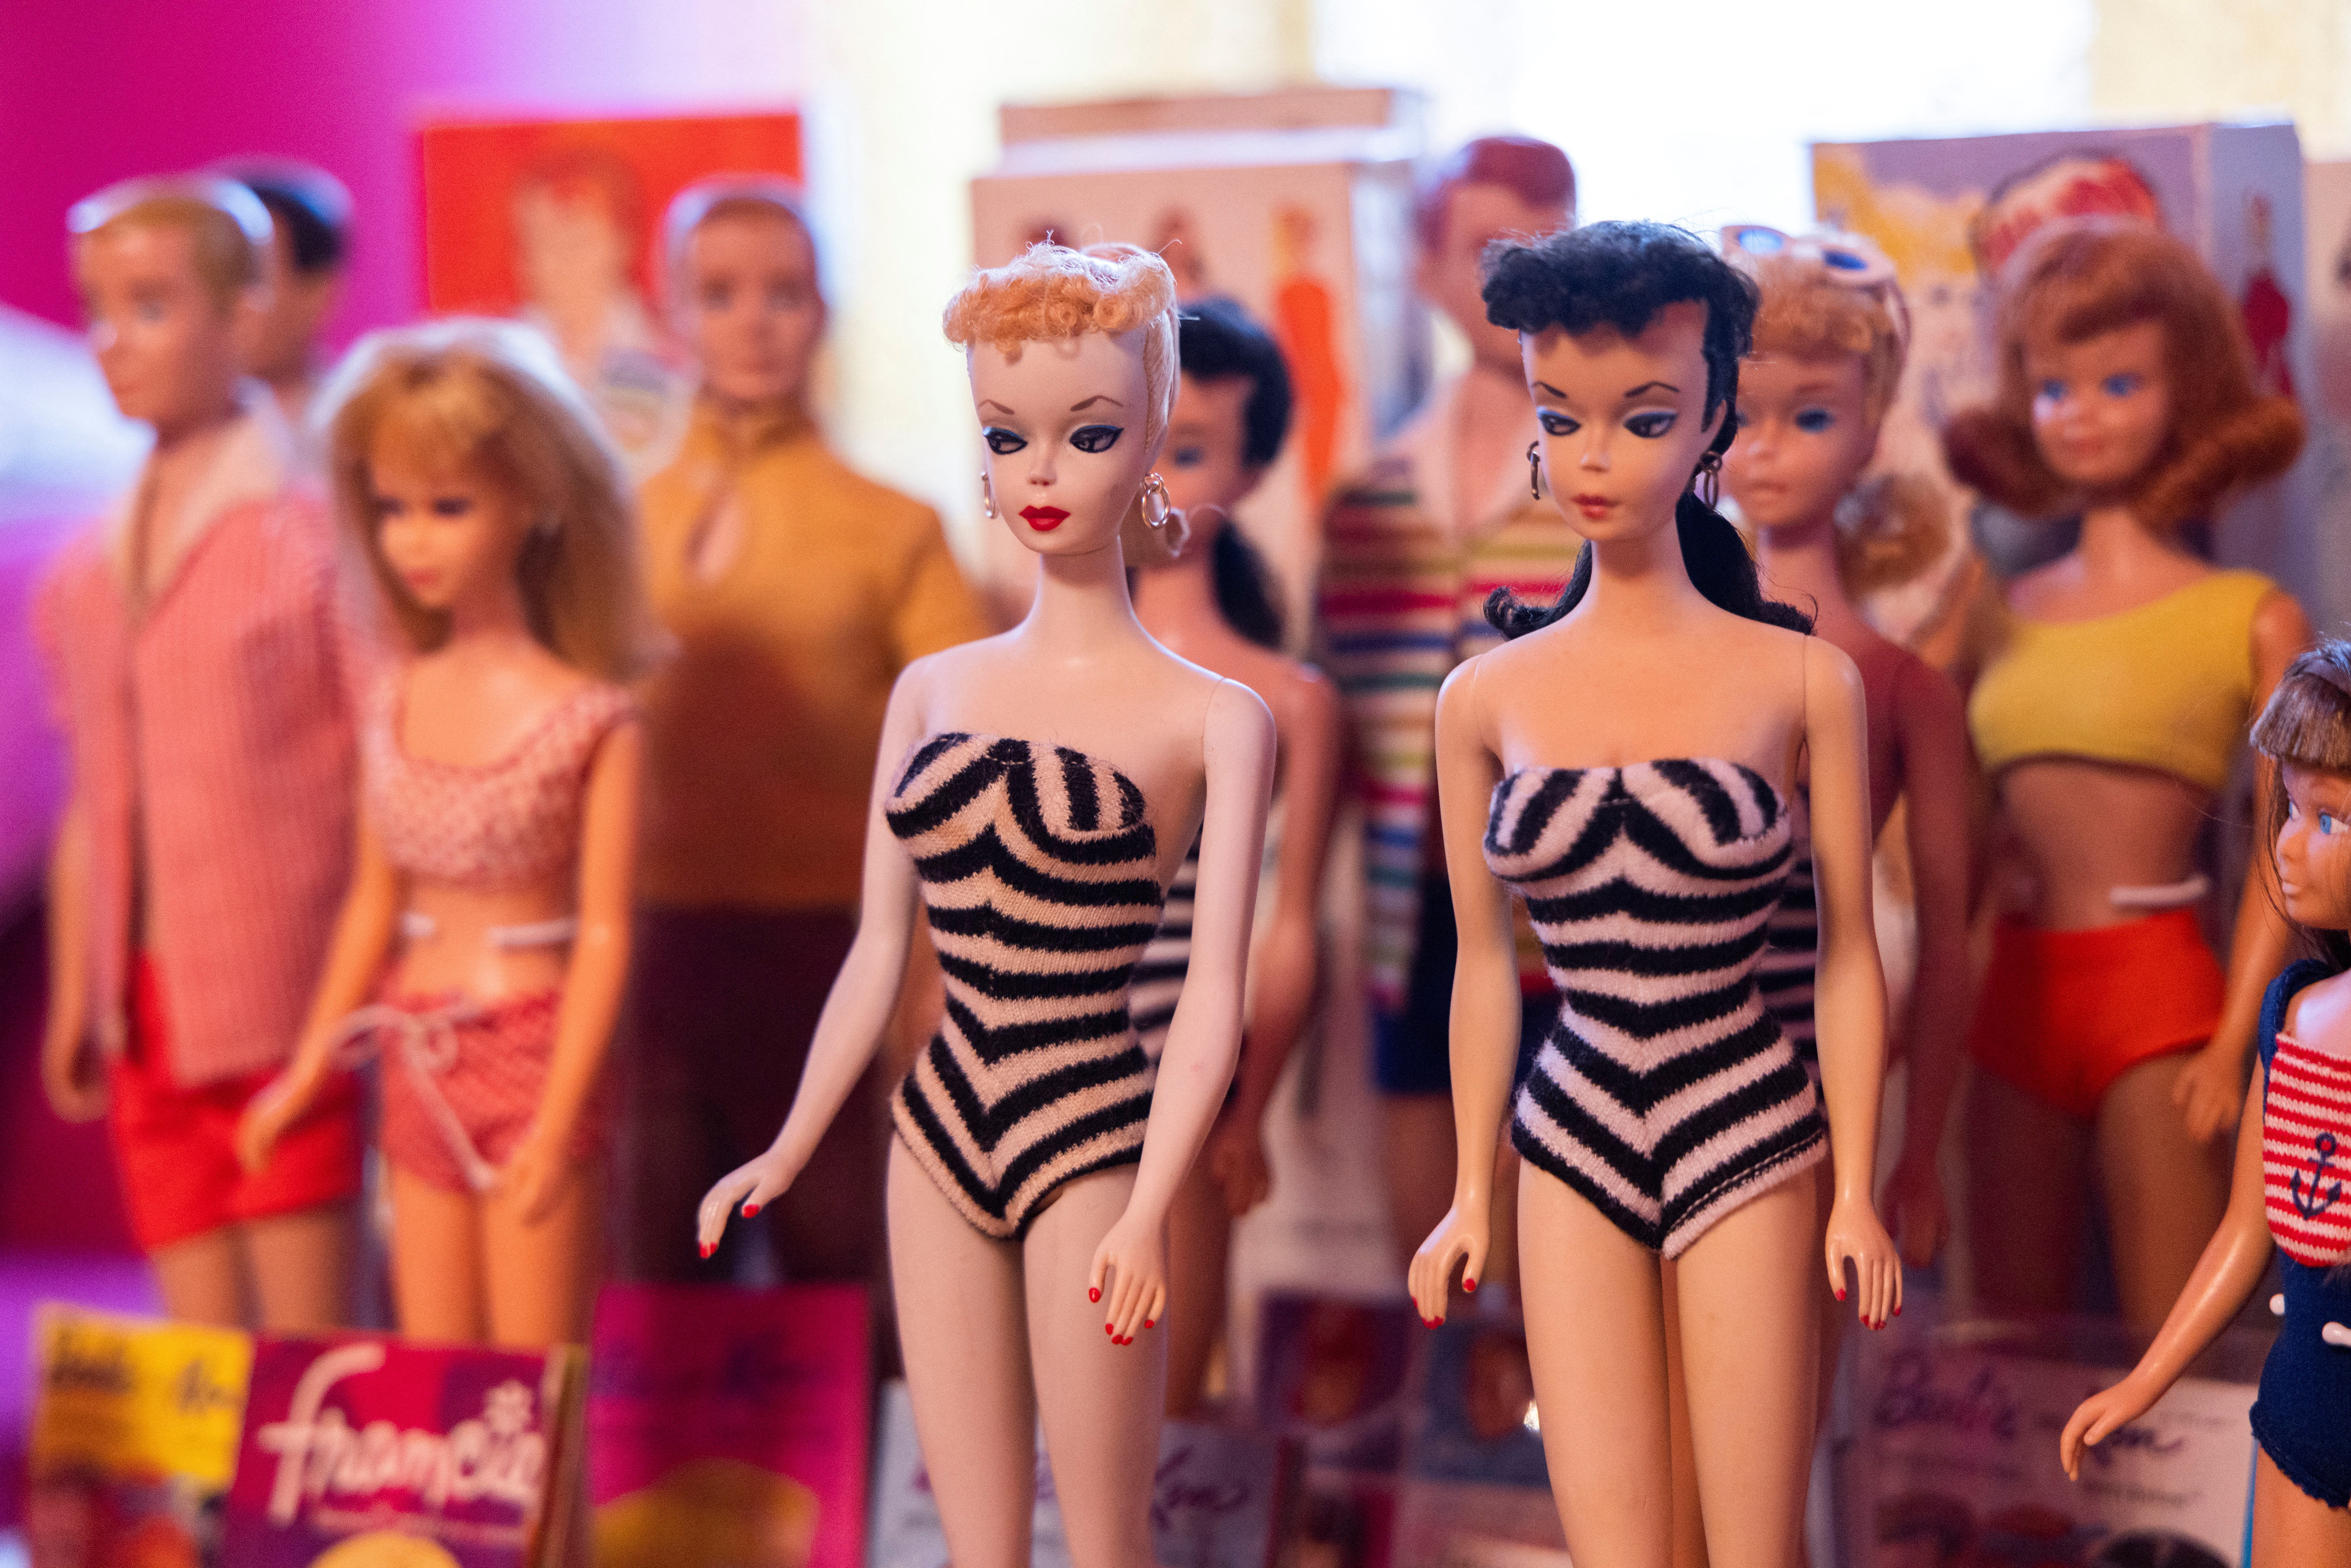 This is my world': Russia's top Barbie fan sees herself in movie